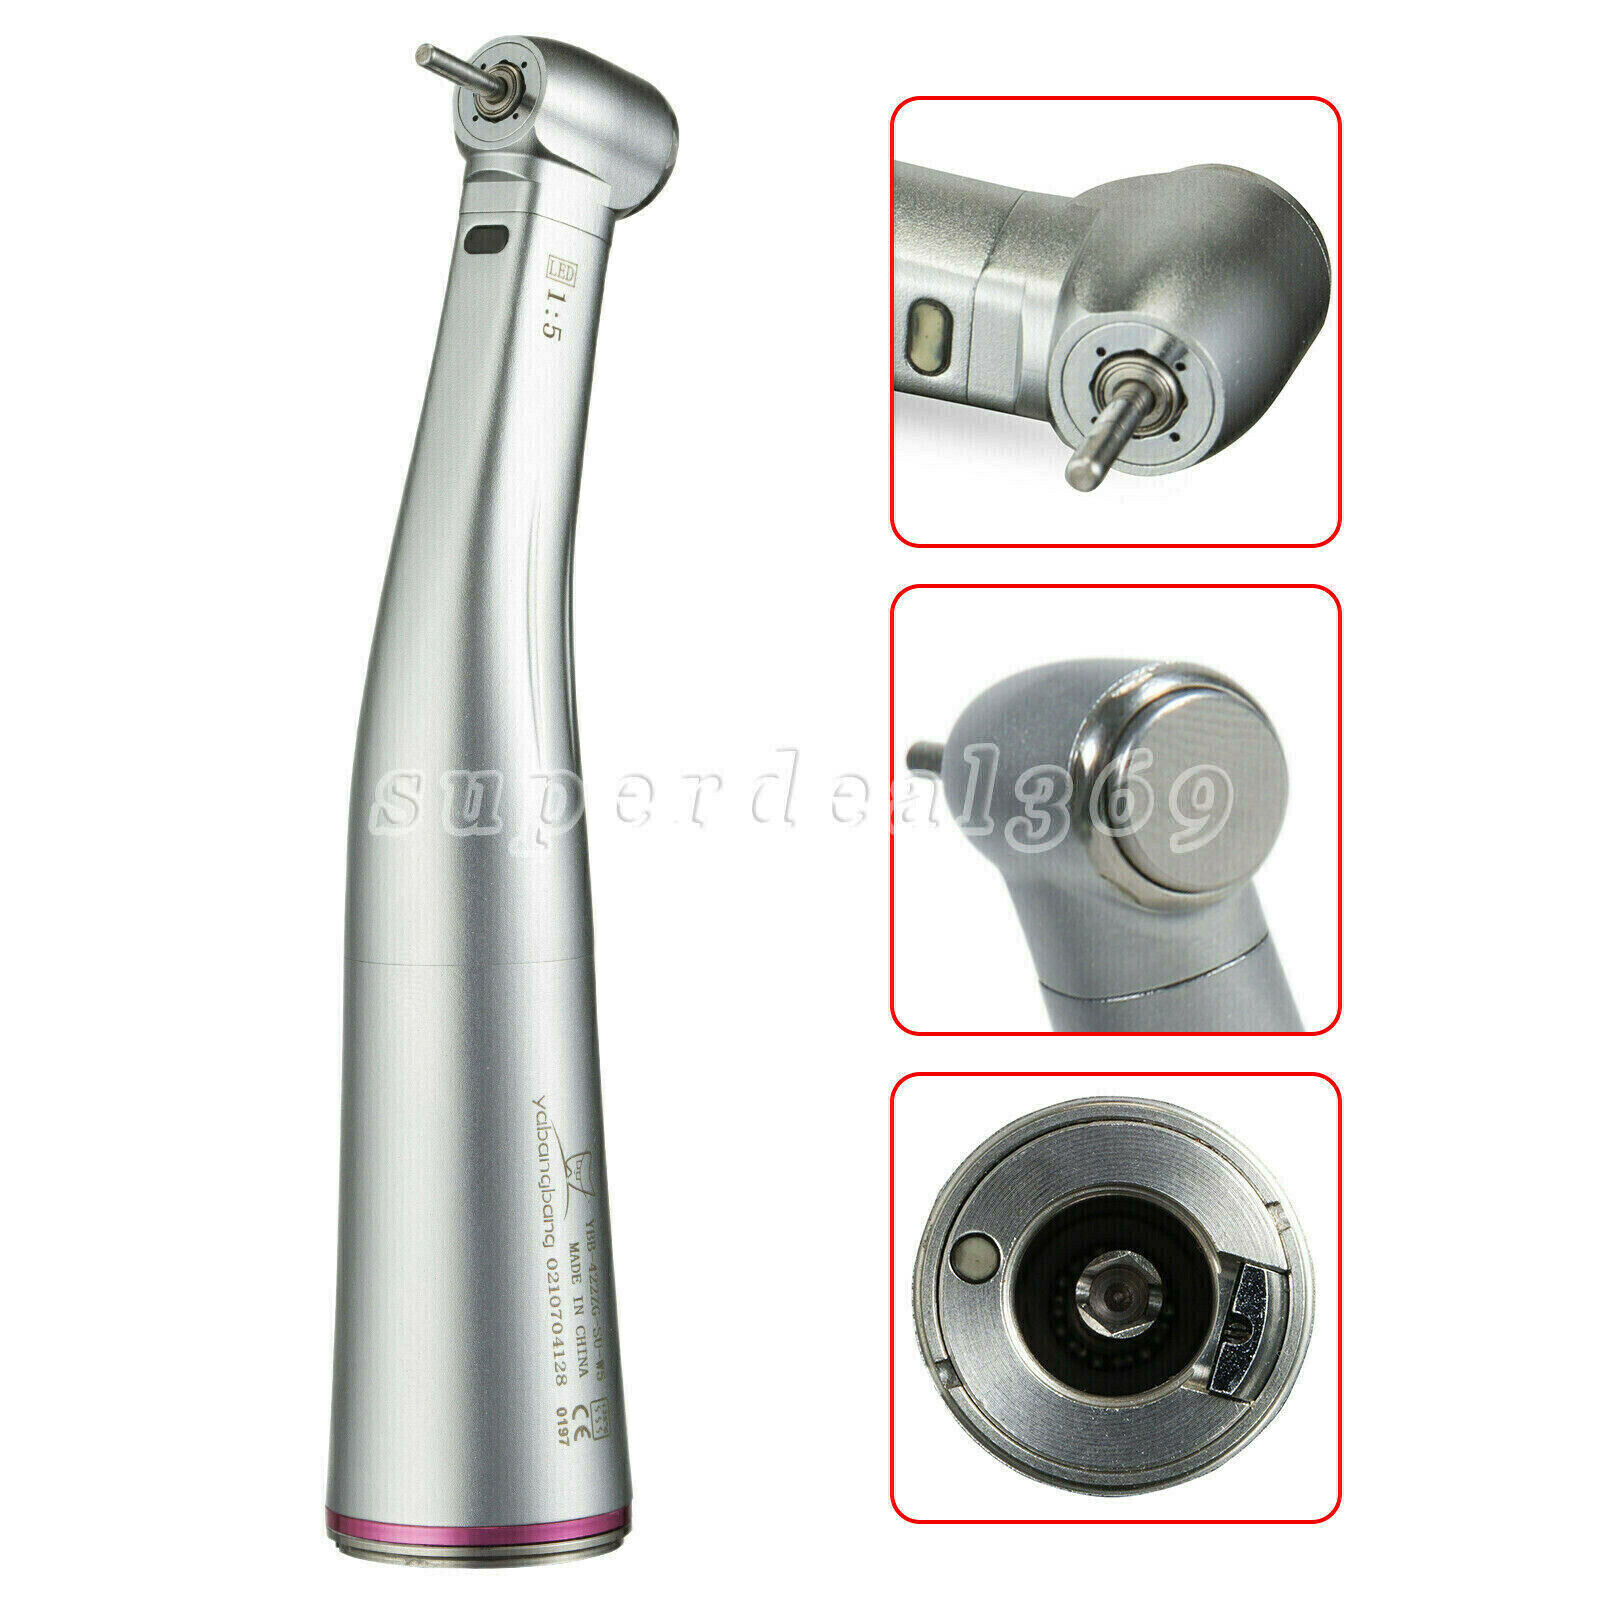 Dental 1:5 / 1:1 /1:4.2 (Increasing) LED Optic Contra Angle Handpiece Fit NSK Q1